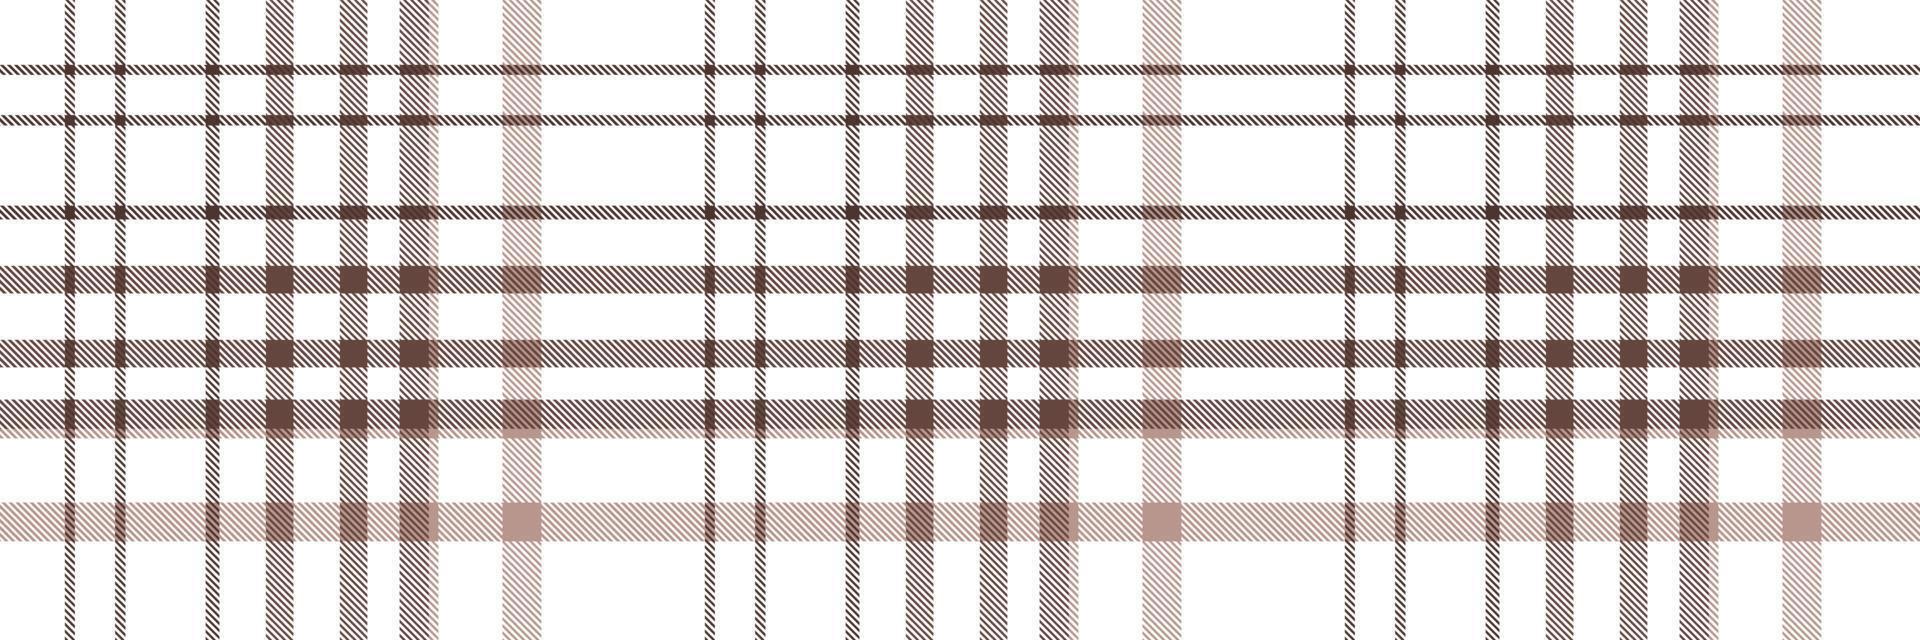 Check plaid pattern  seamless is a patterned cloth consisting of criss crossed, horizontal and vertical bands in multiple colours.Seamless tartan for  scarf,pyjamas,blanket,duvet,kilt large shawl. vector